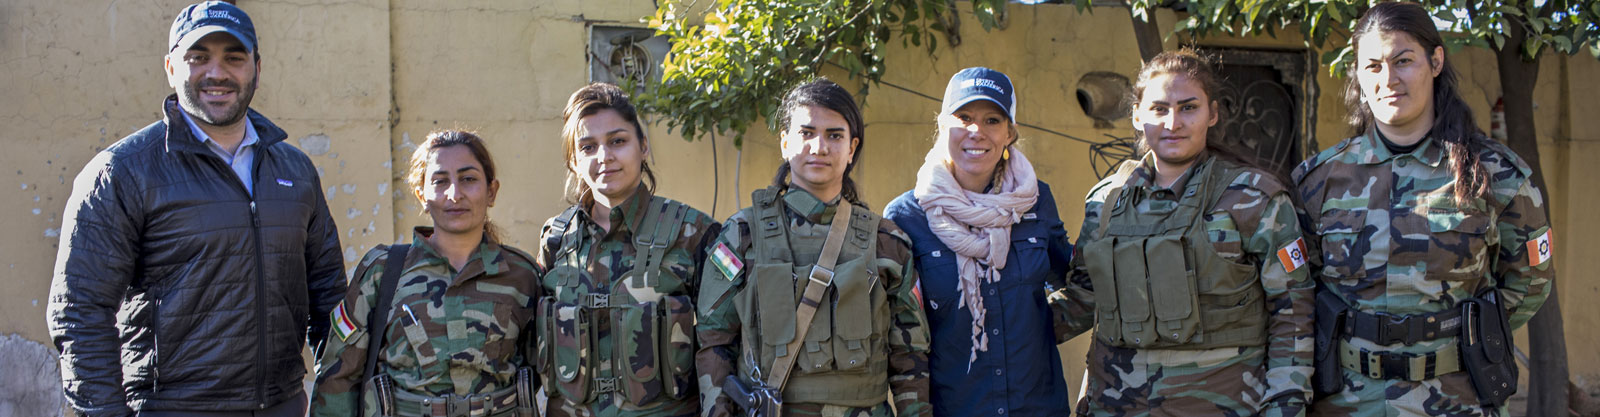 International Women’s Day: My chance to reflect on service with fellow female combat veterans in northern Iraq